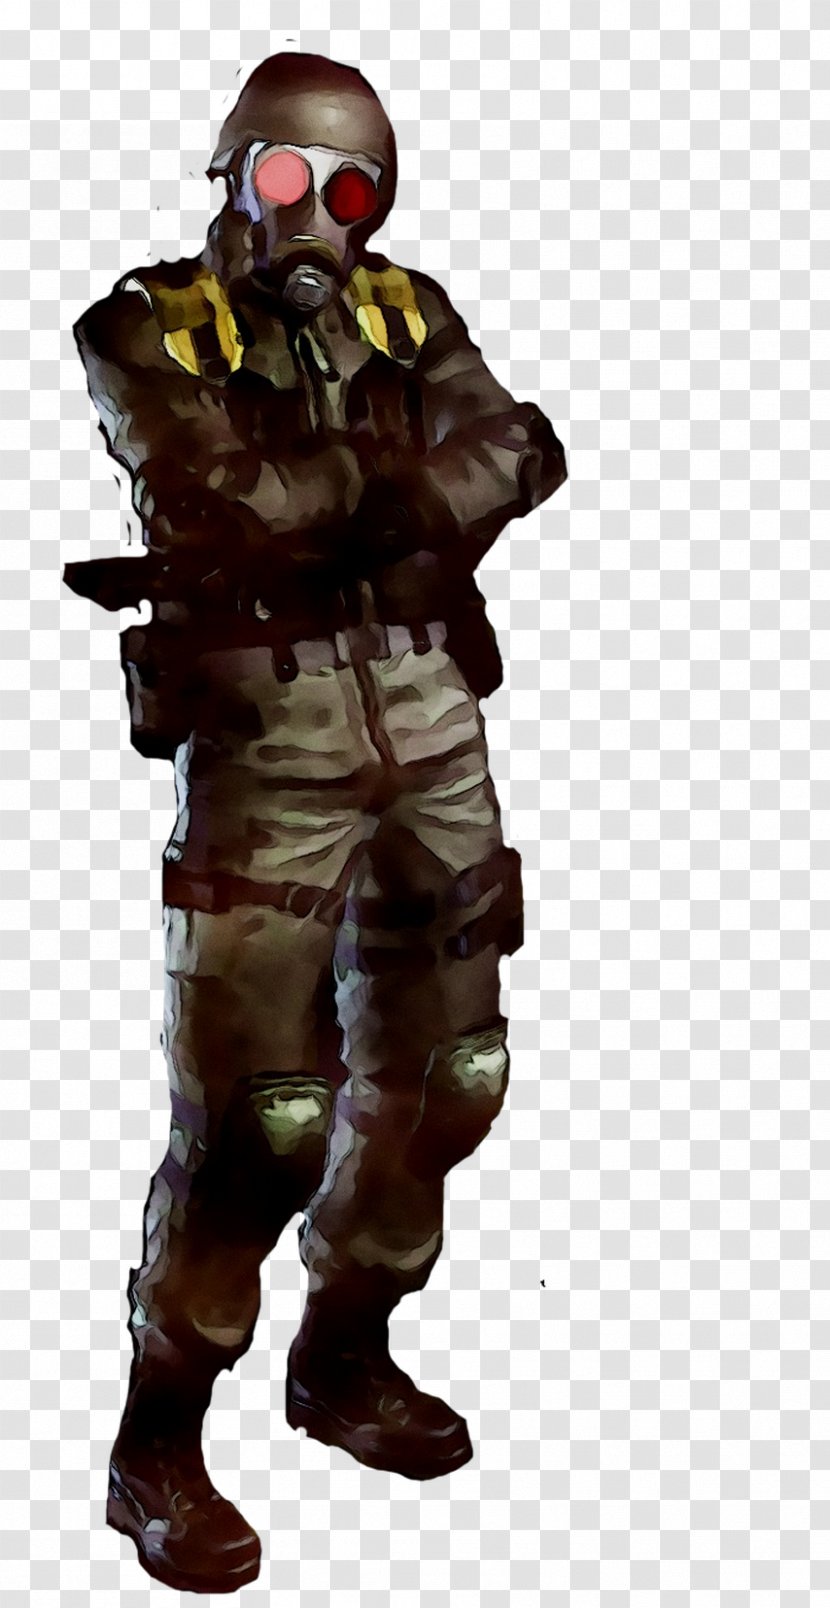 Soldier Infantry Military Police - Grenadier - Person Transparent PNG